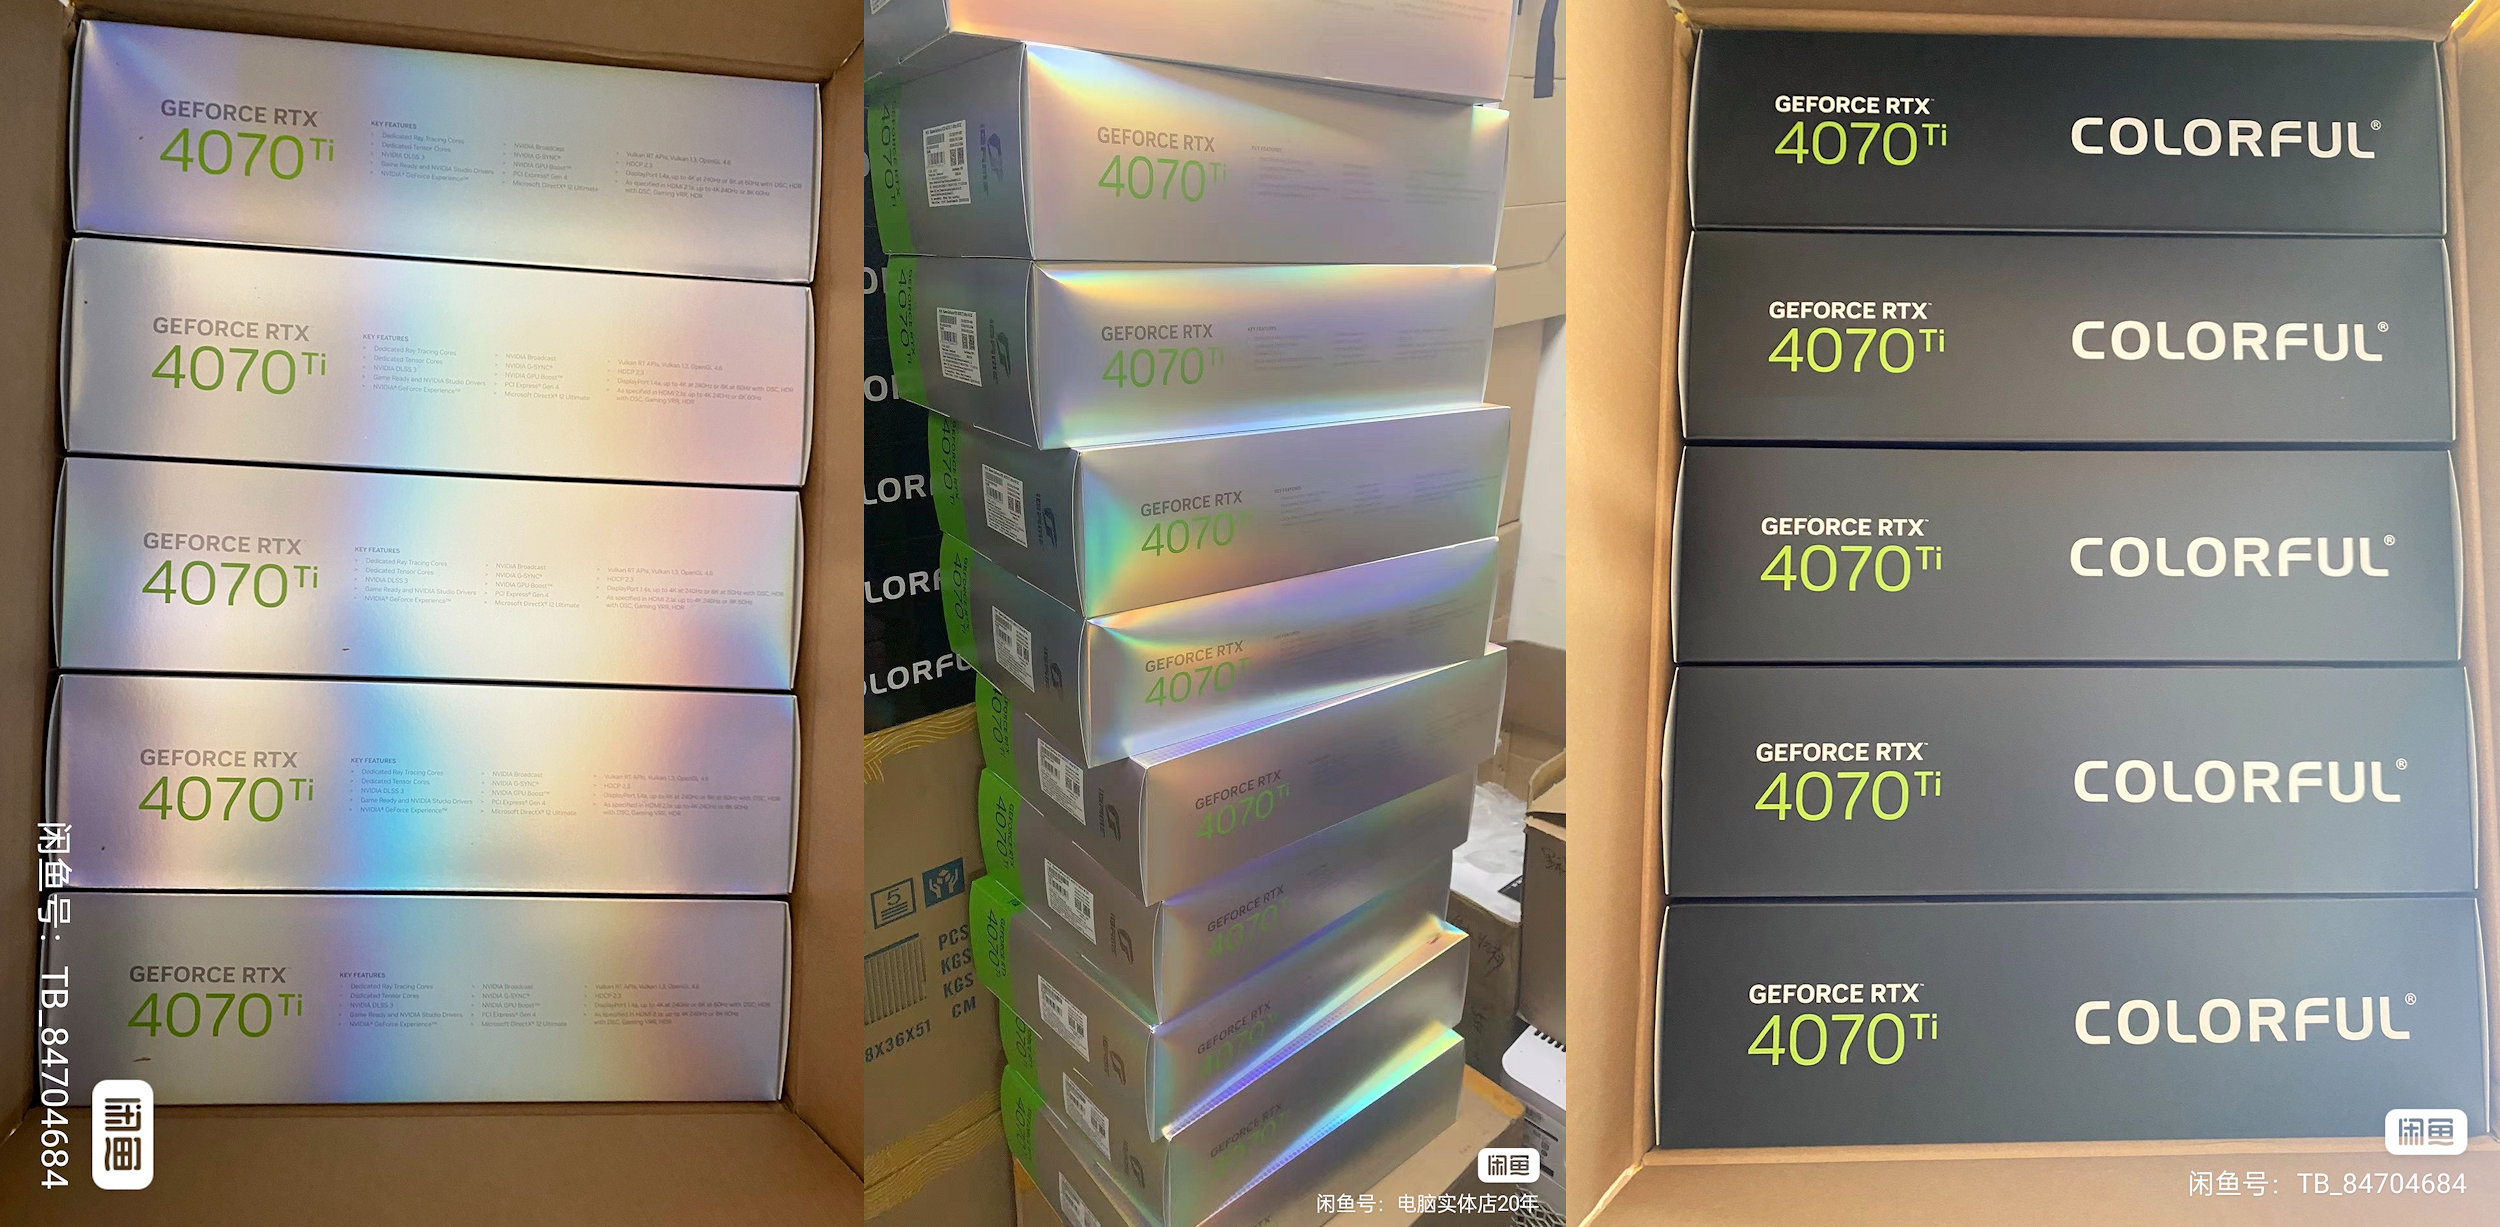 A huge number of boxes for the joy of gamers.  GeForce RTX 4070 Ti is already arriving in Chinese stores